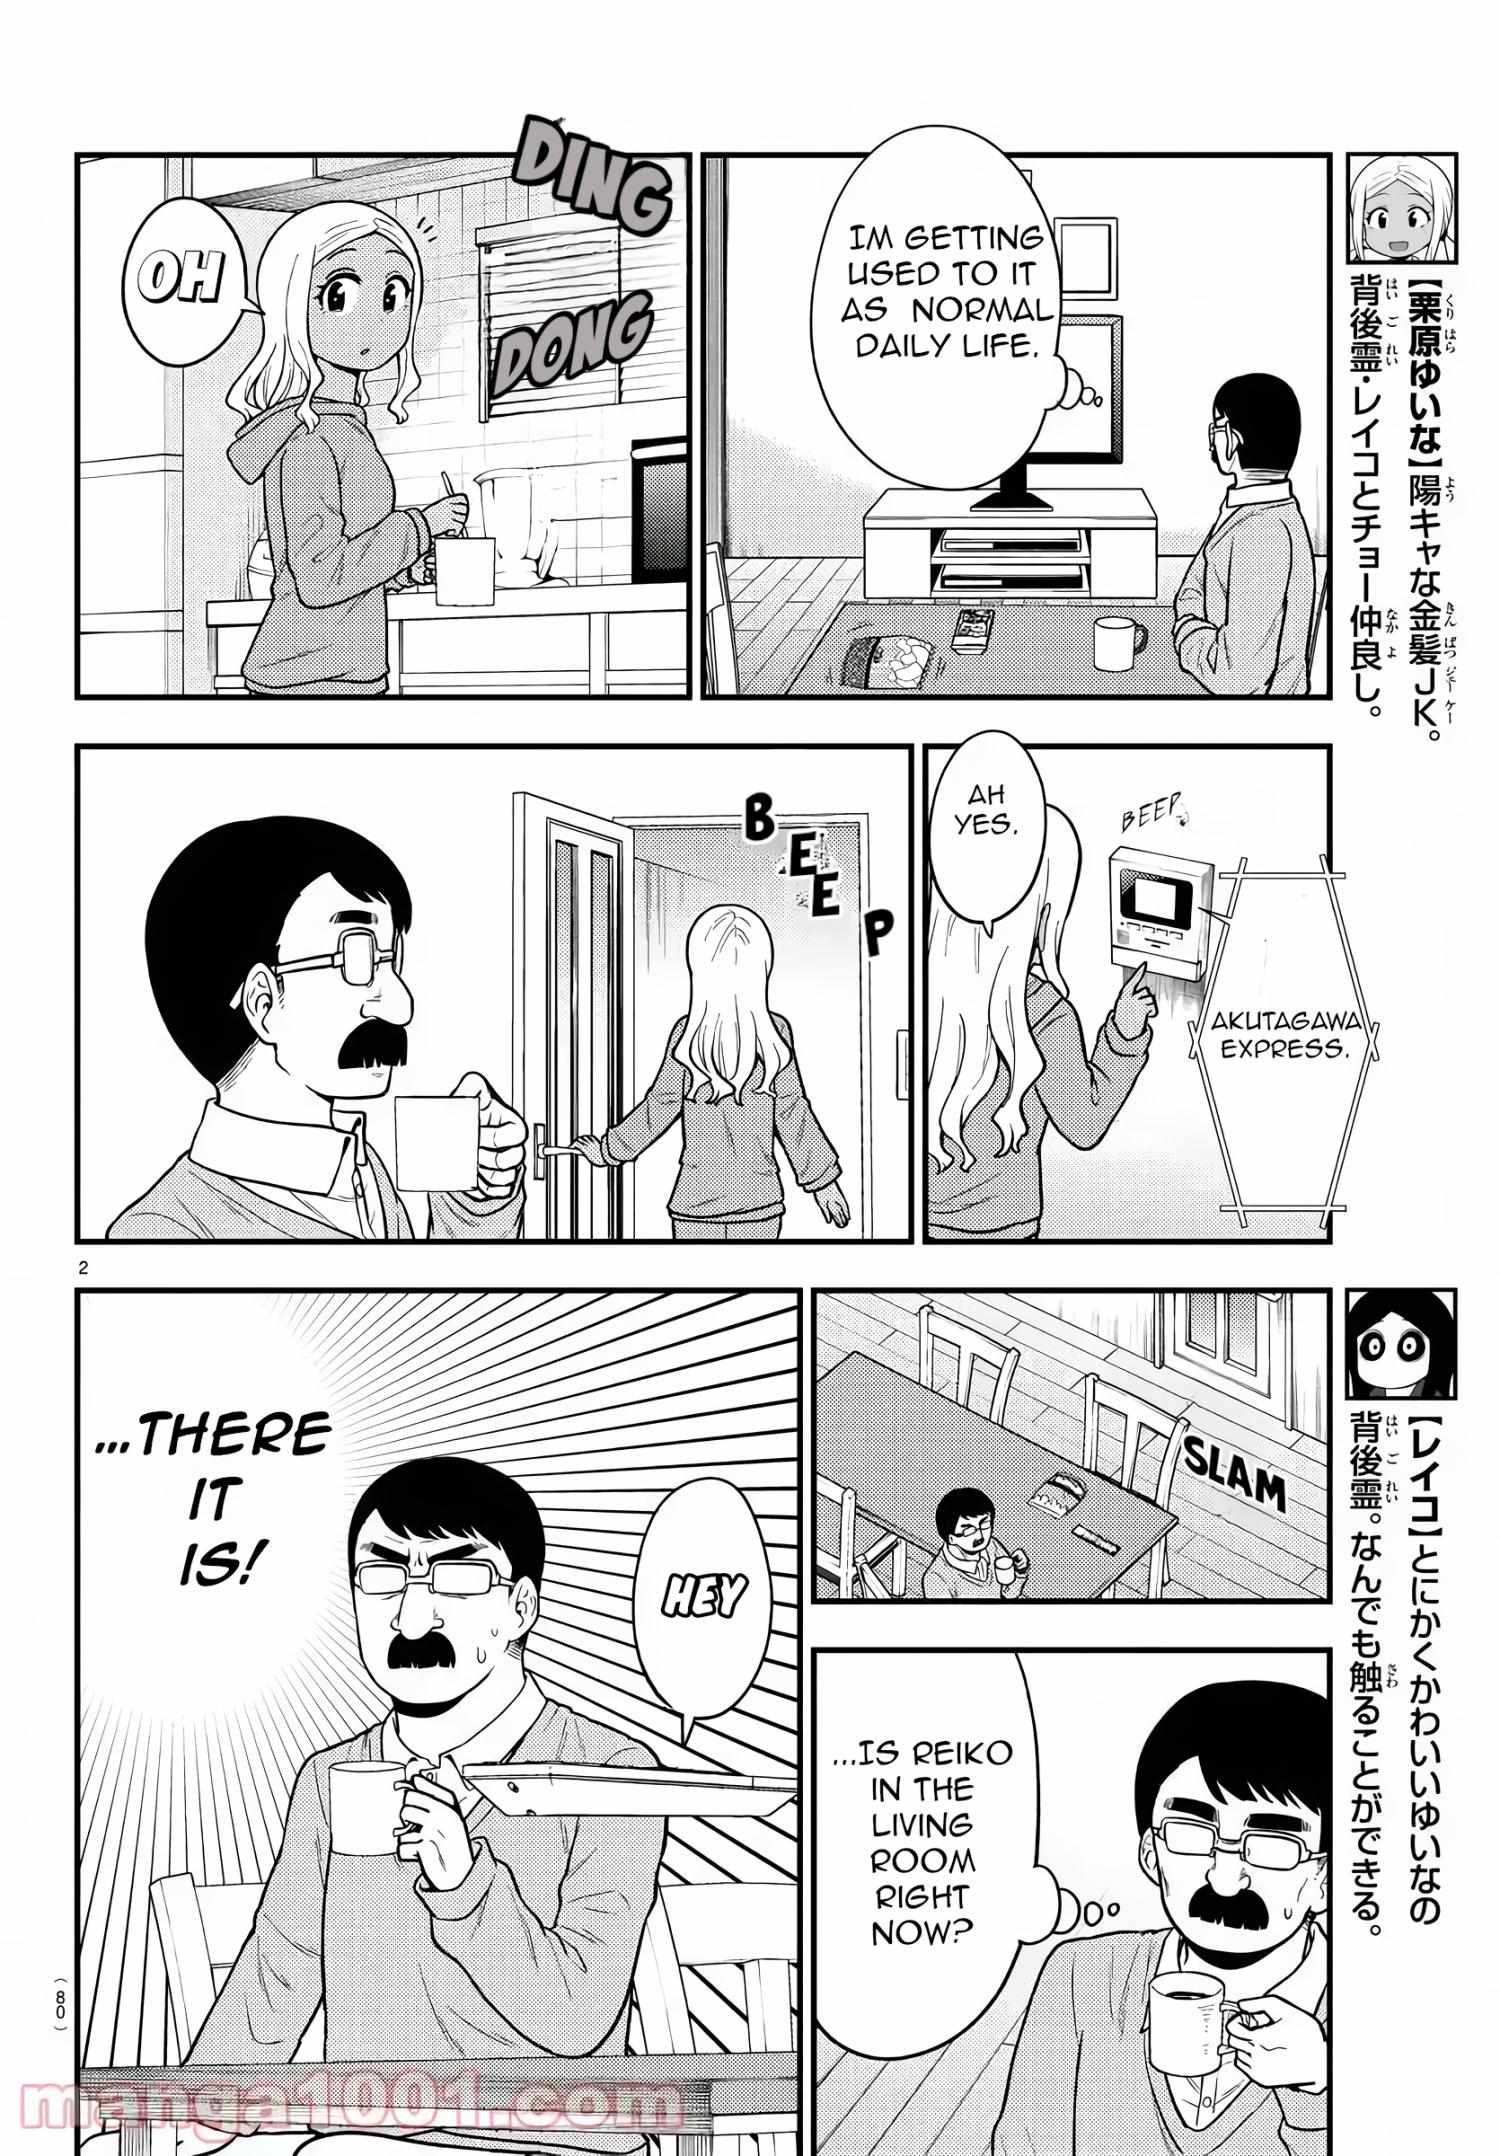 There's A Ghost Behind That Gyaru - chapter 39 - #3